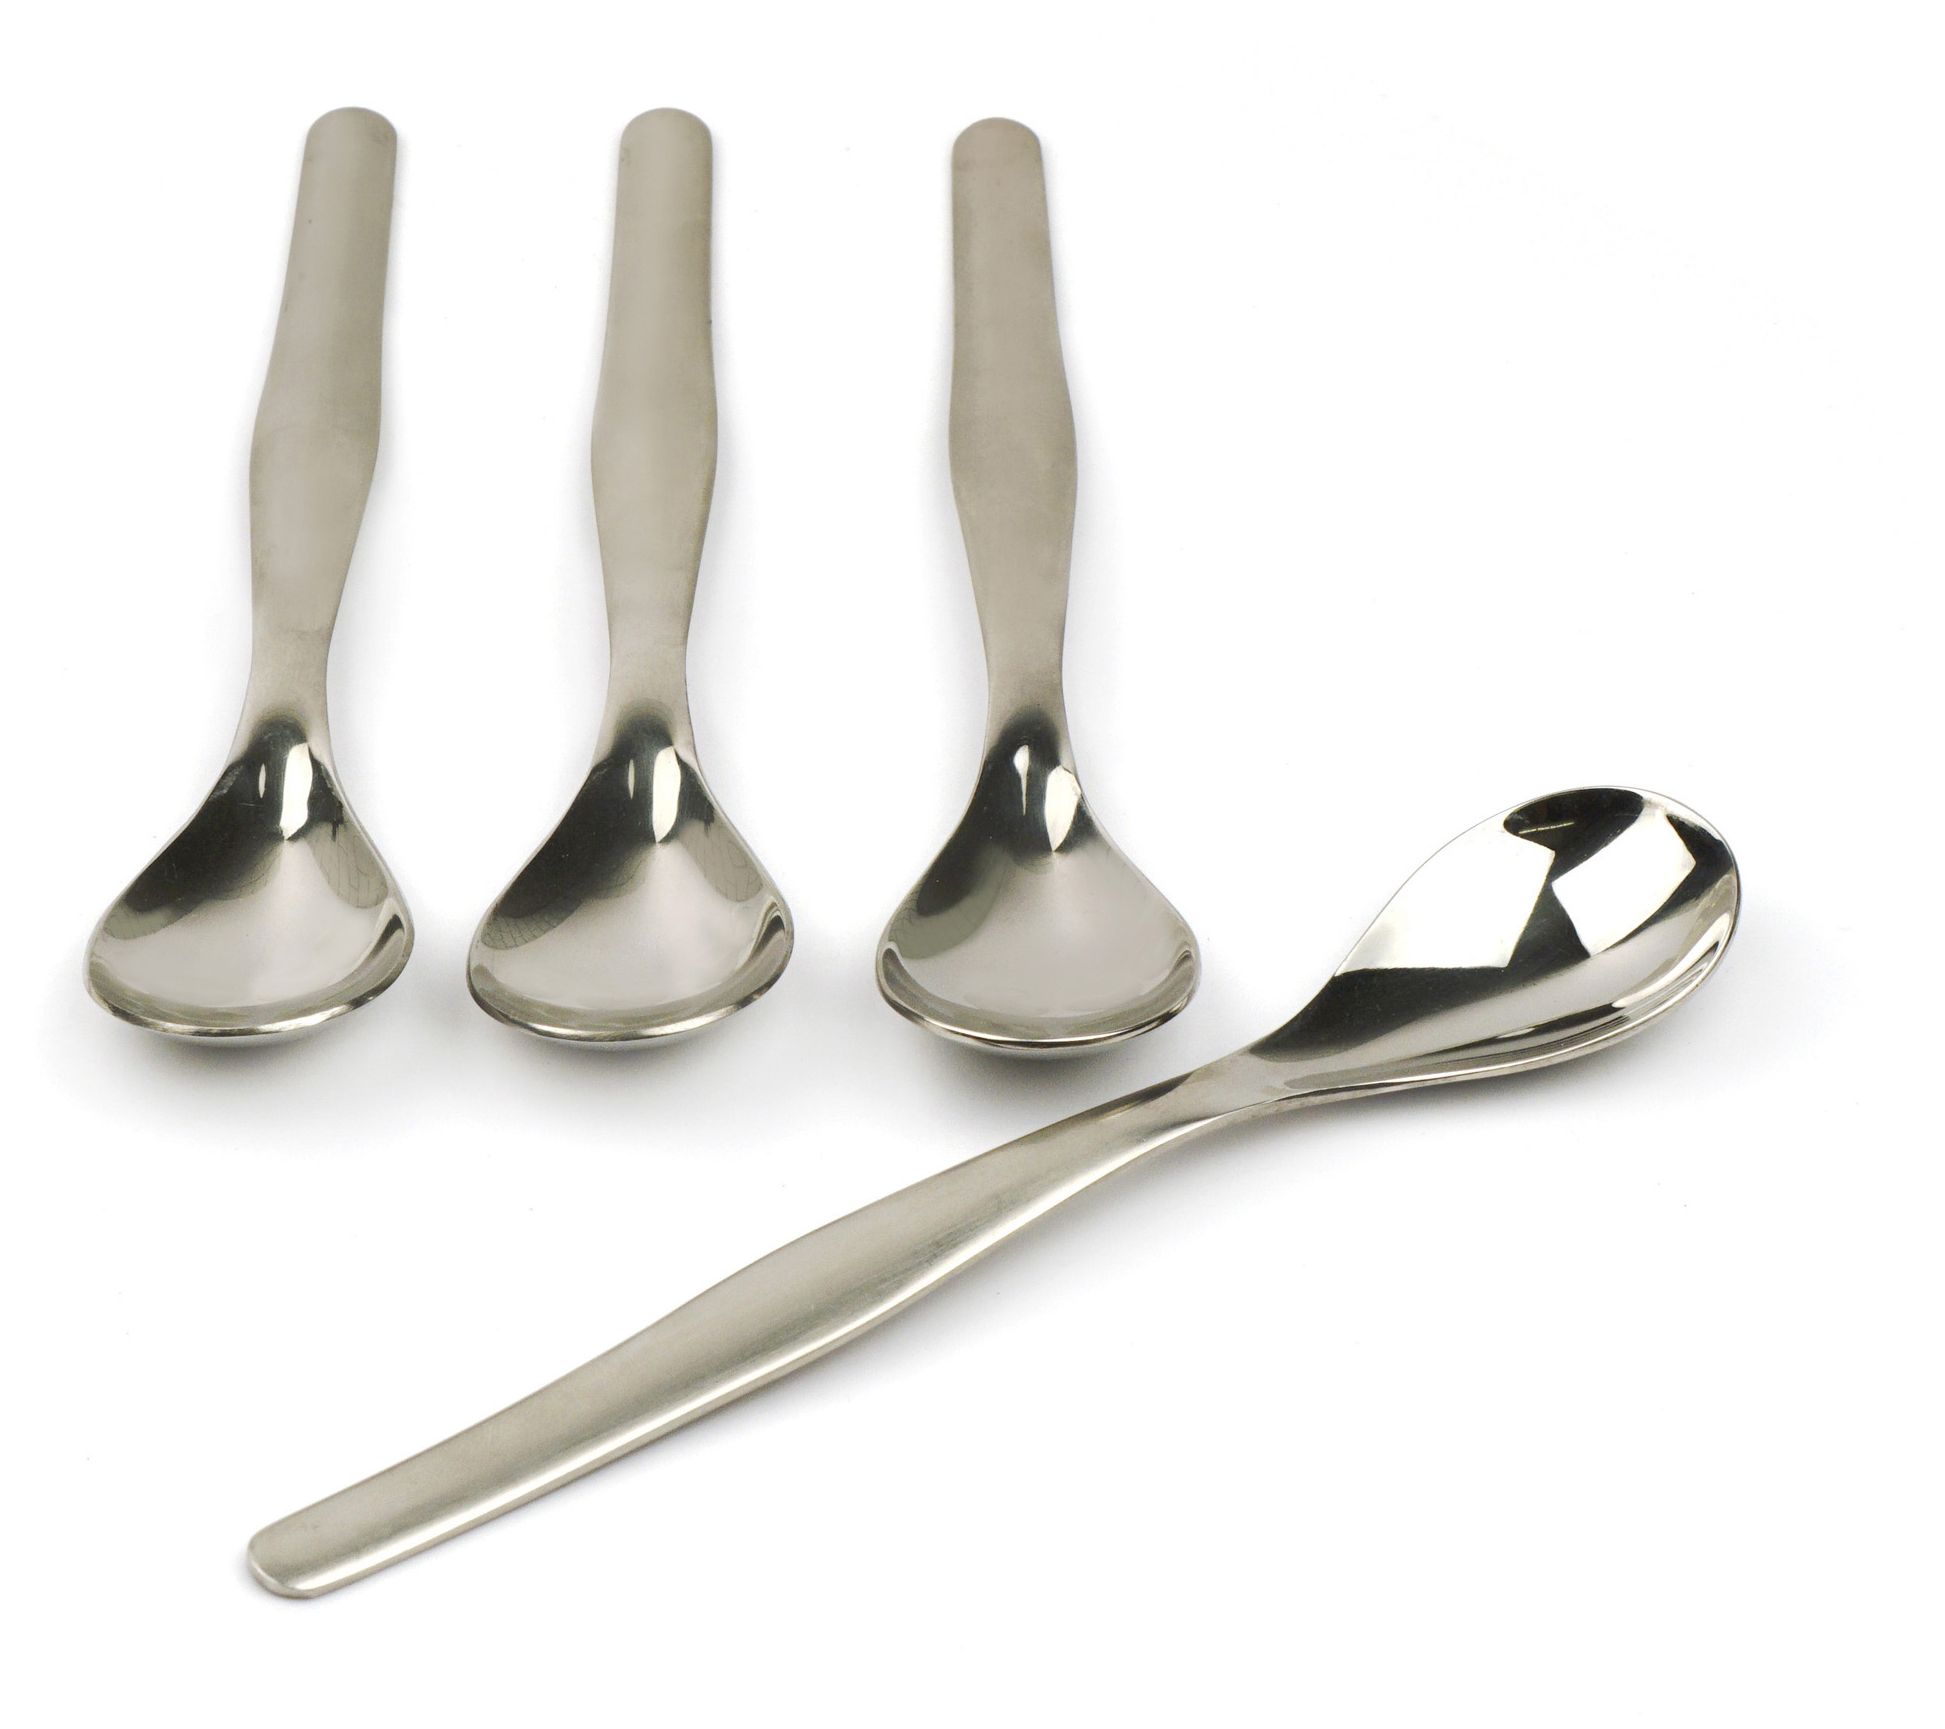 Towle Hammersmith 18/10 Stainless Steel 6 1/8 Teaspoon (Set of Four)